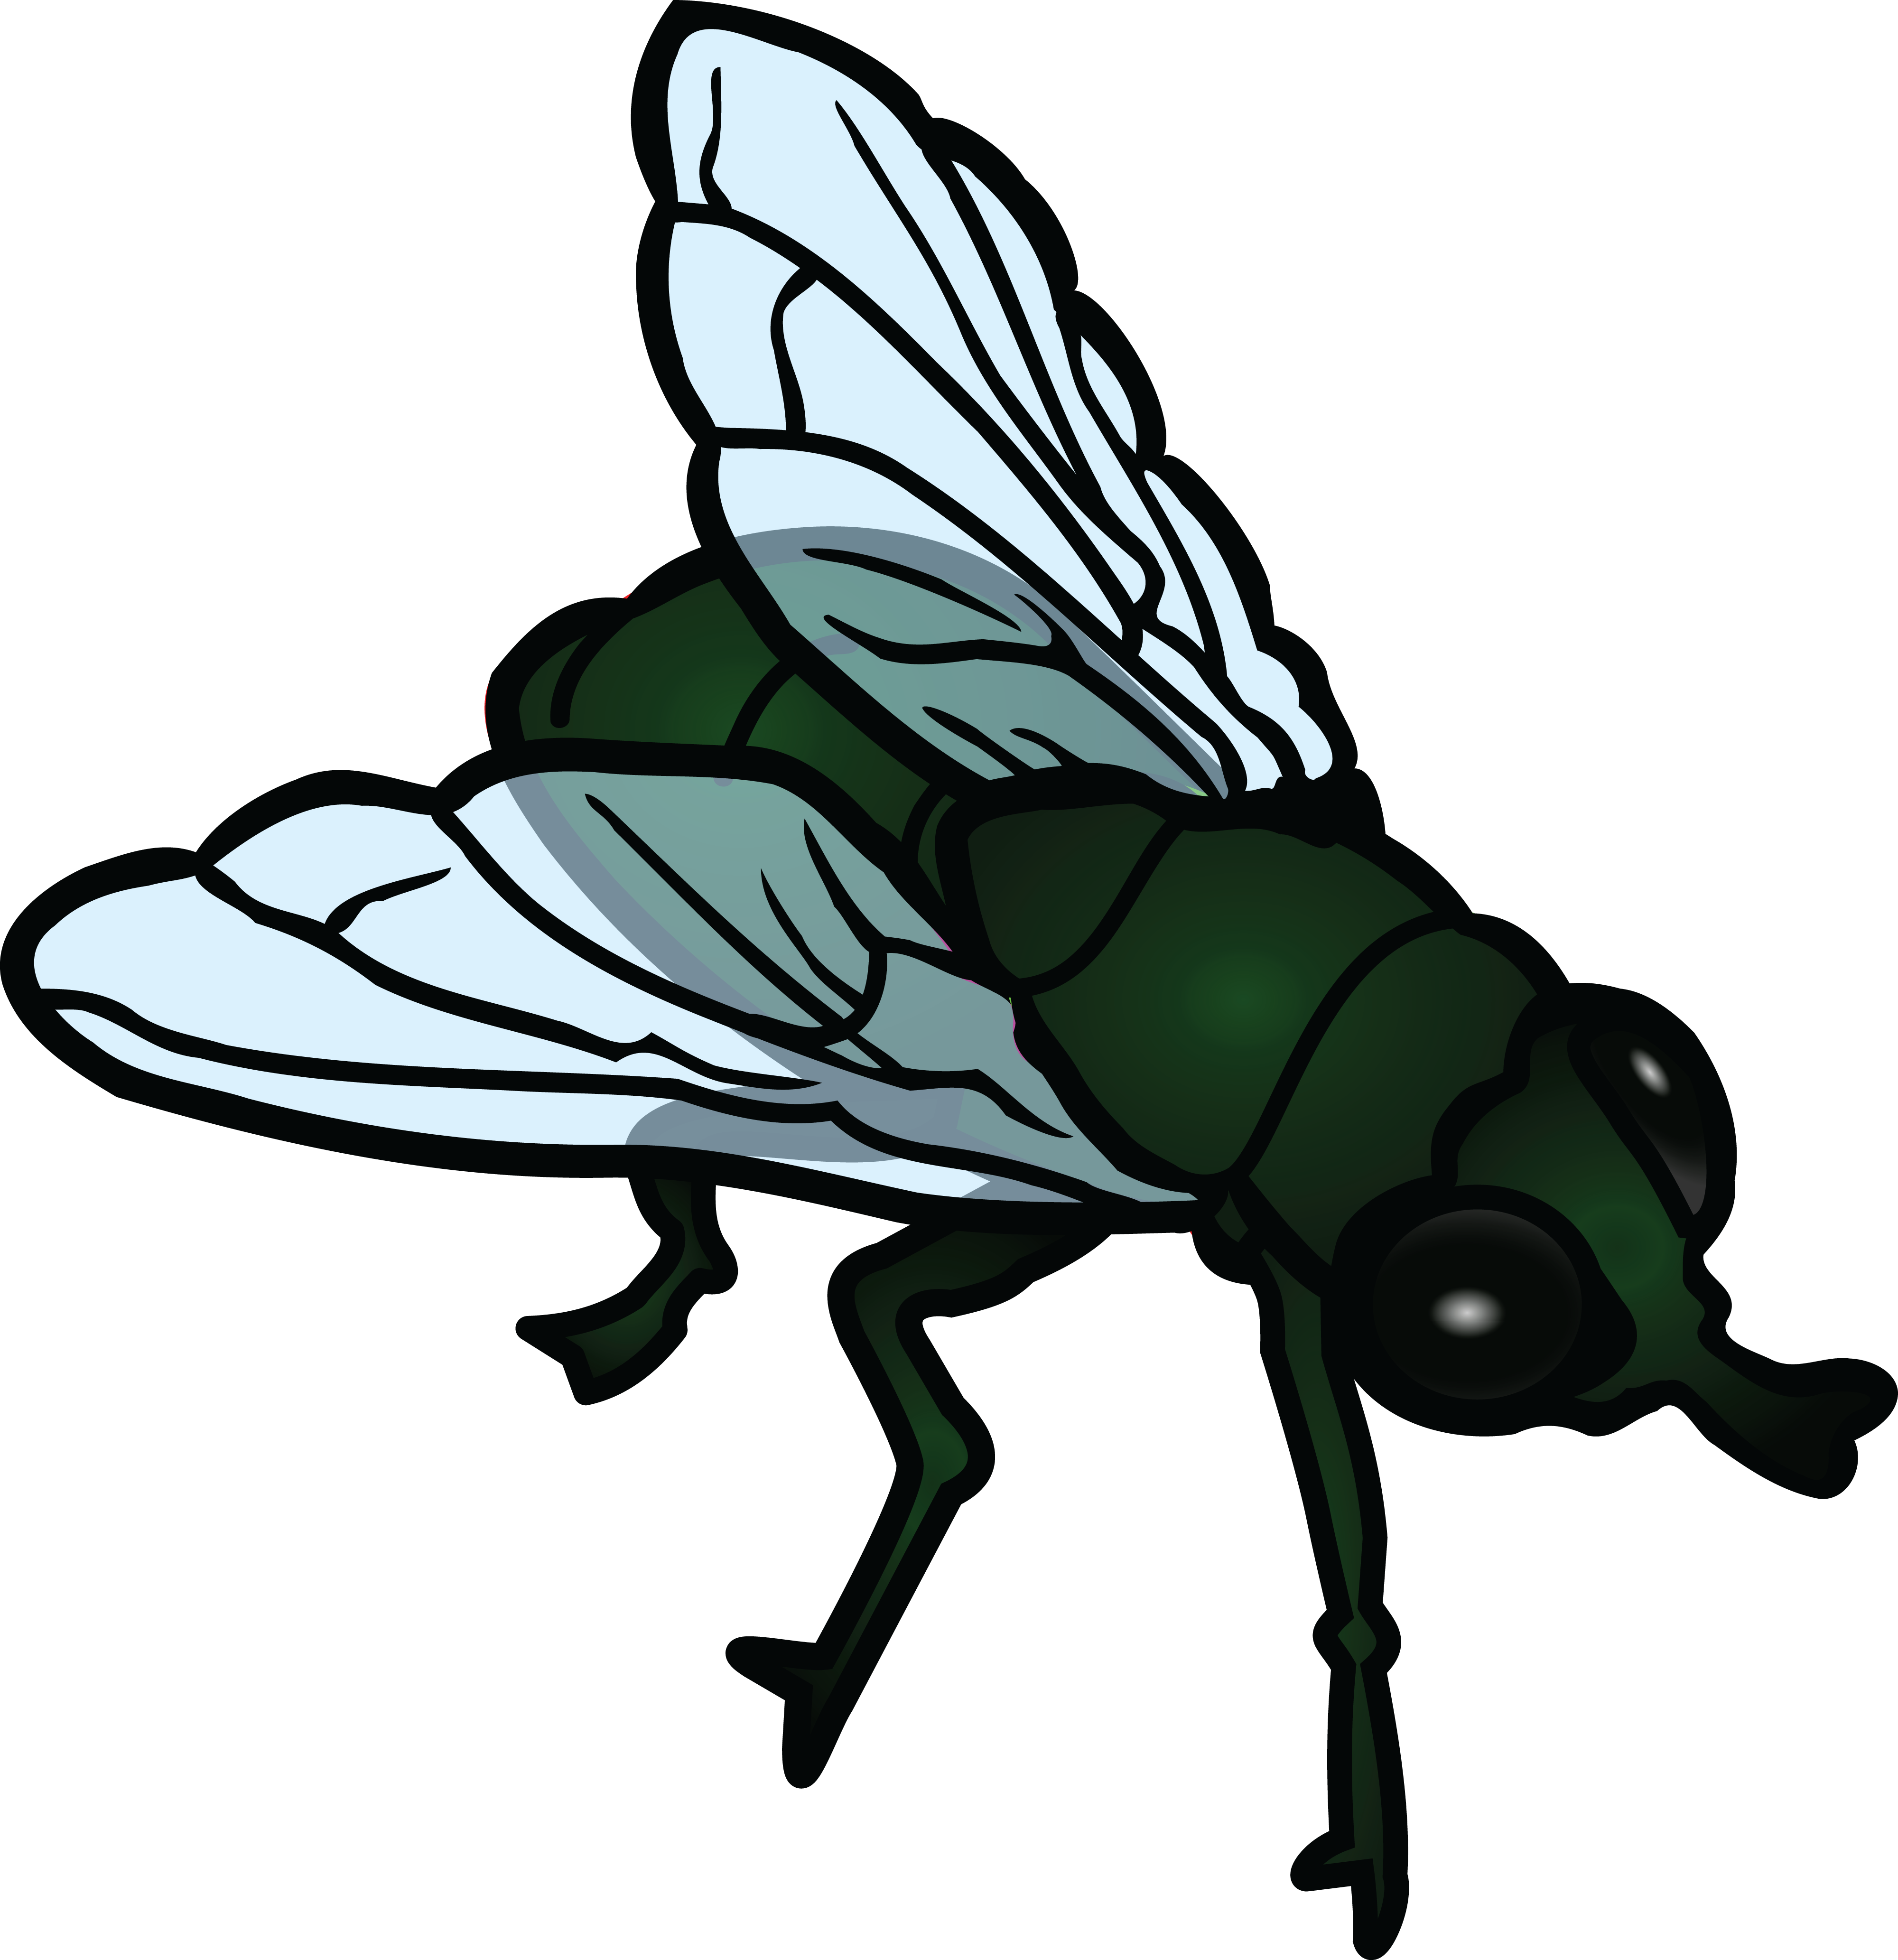 A Fly Clipart.